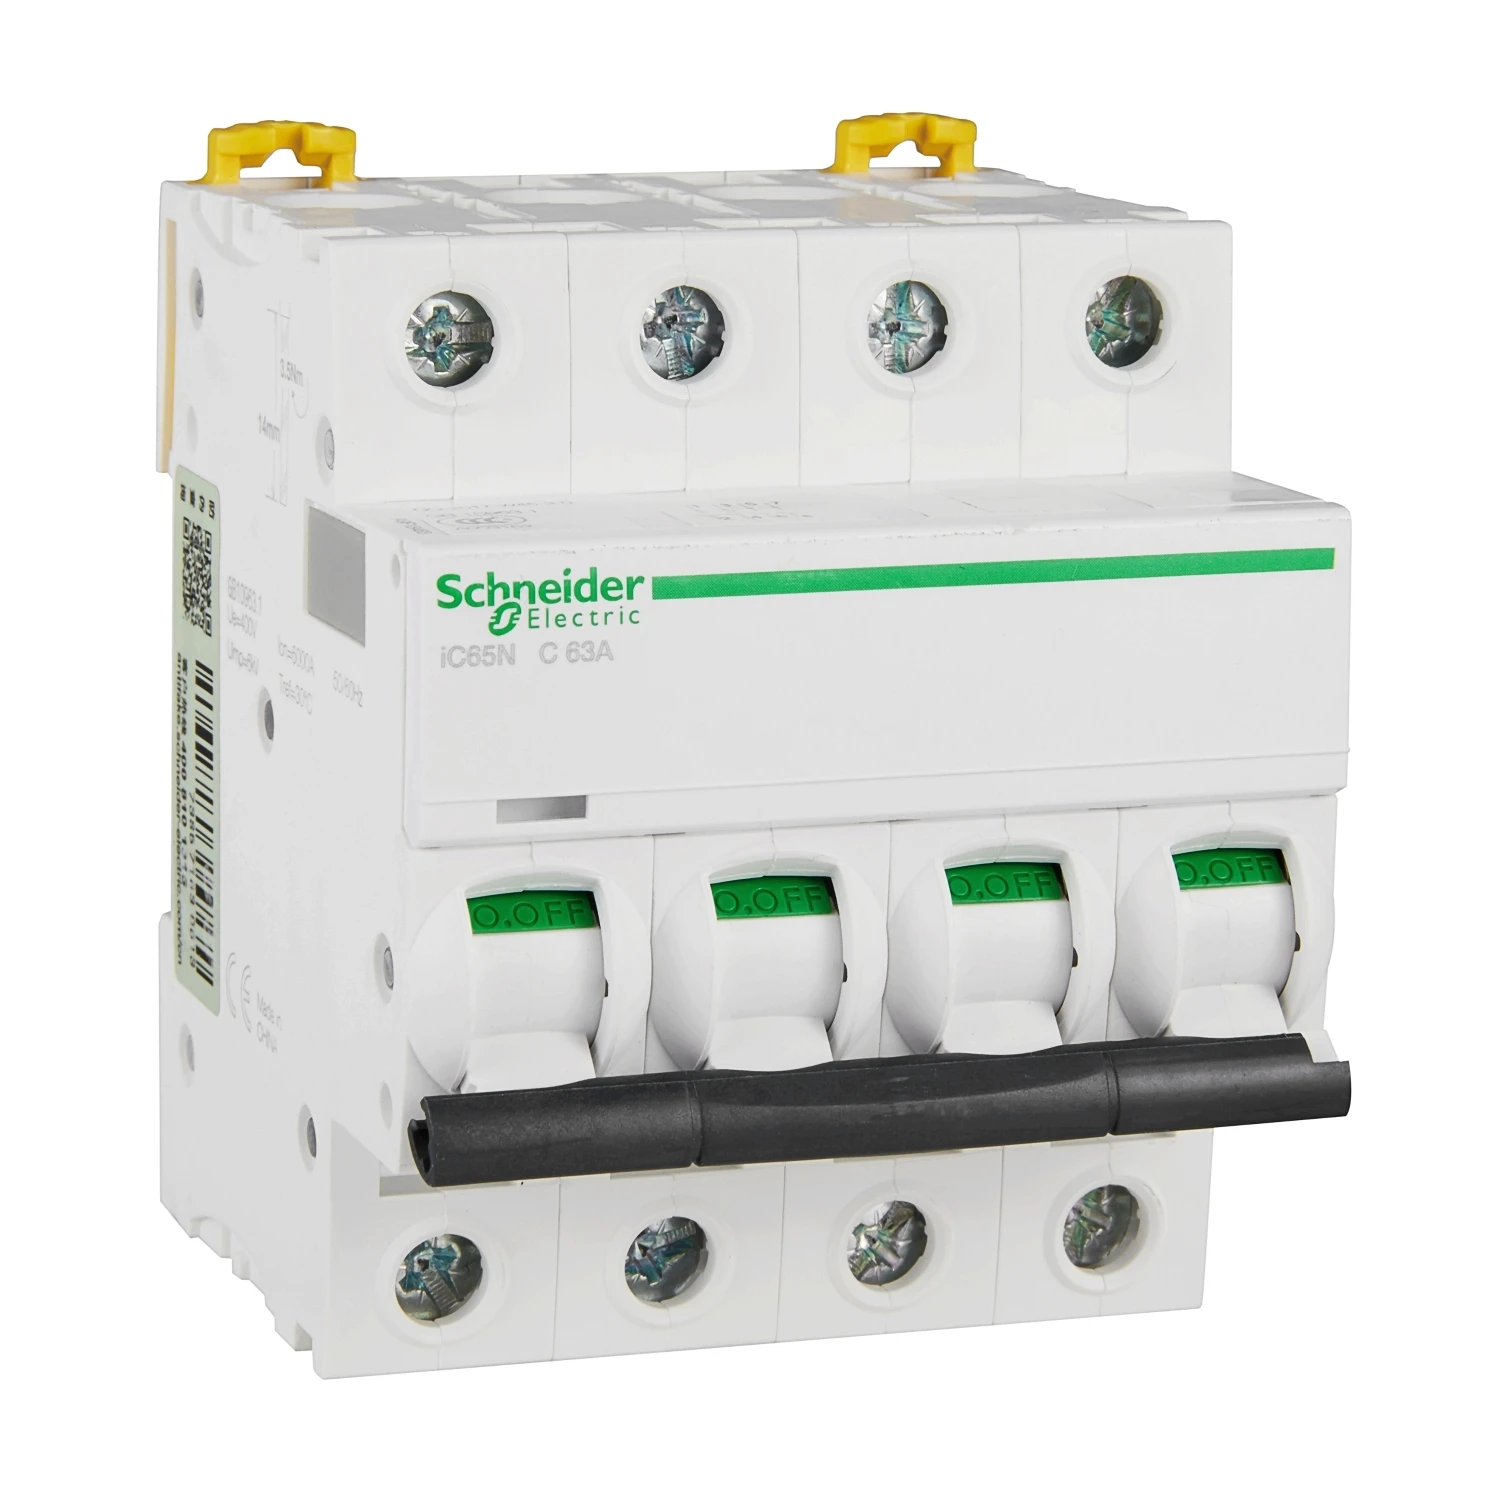 Schneider iC65N-C The Ultimate Miniature Circuit Breaker for Efficient Electrical Safety 1-80A MCB 1-4p